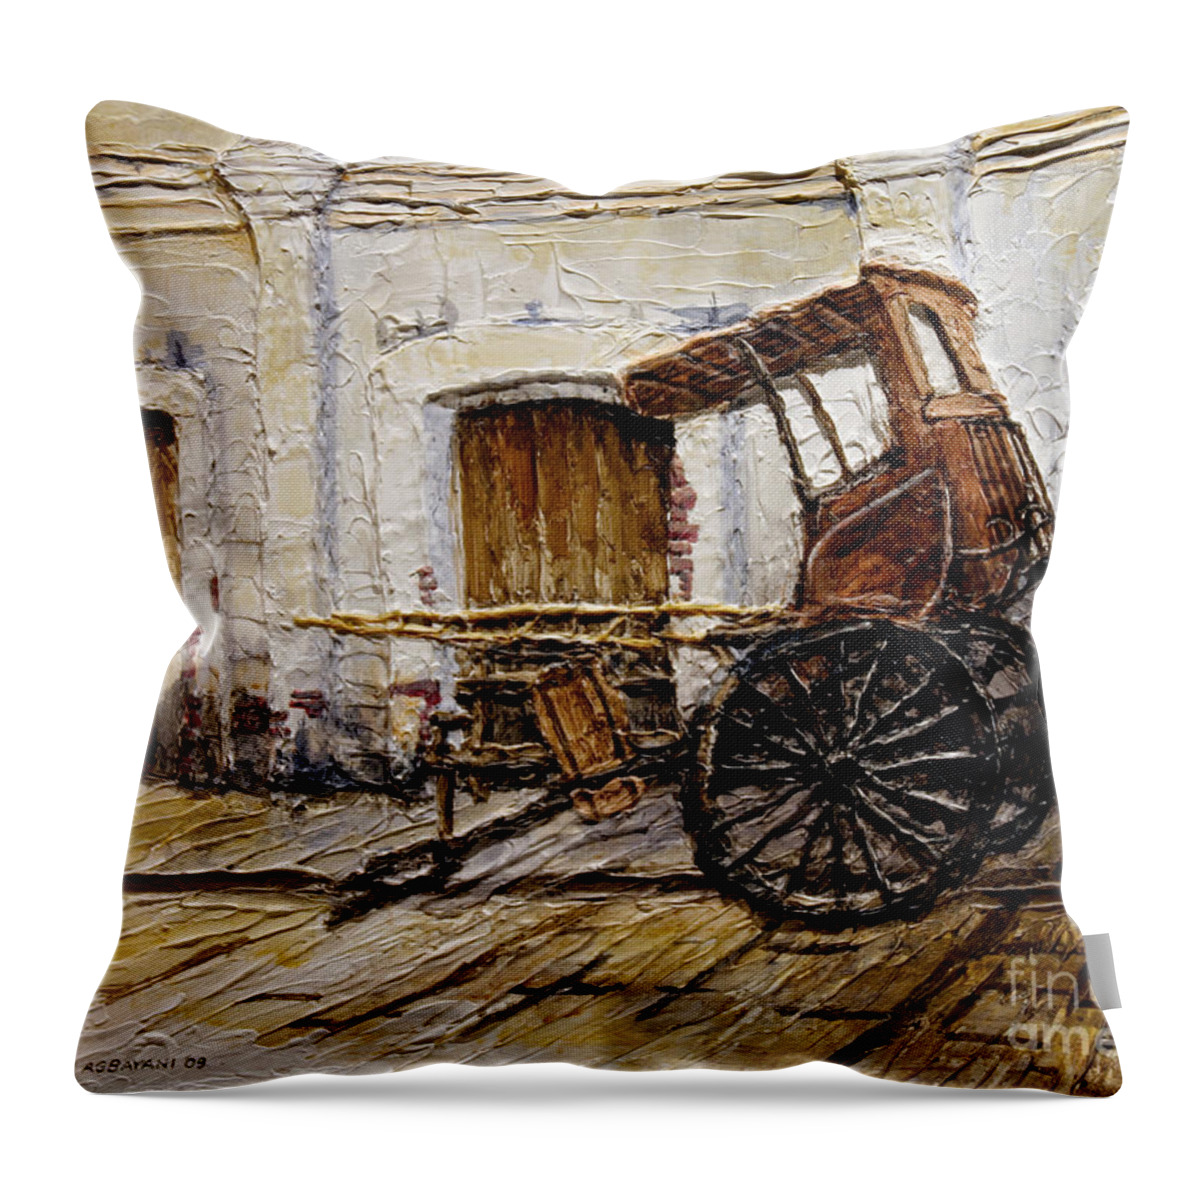 Vigan Throw Pillow featuring the painting Vigan Carriage 1 by Joey Agbayani